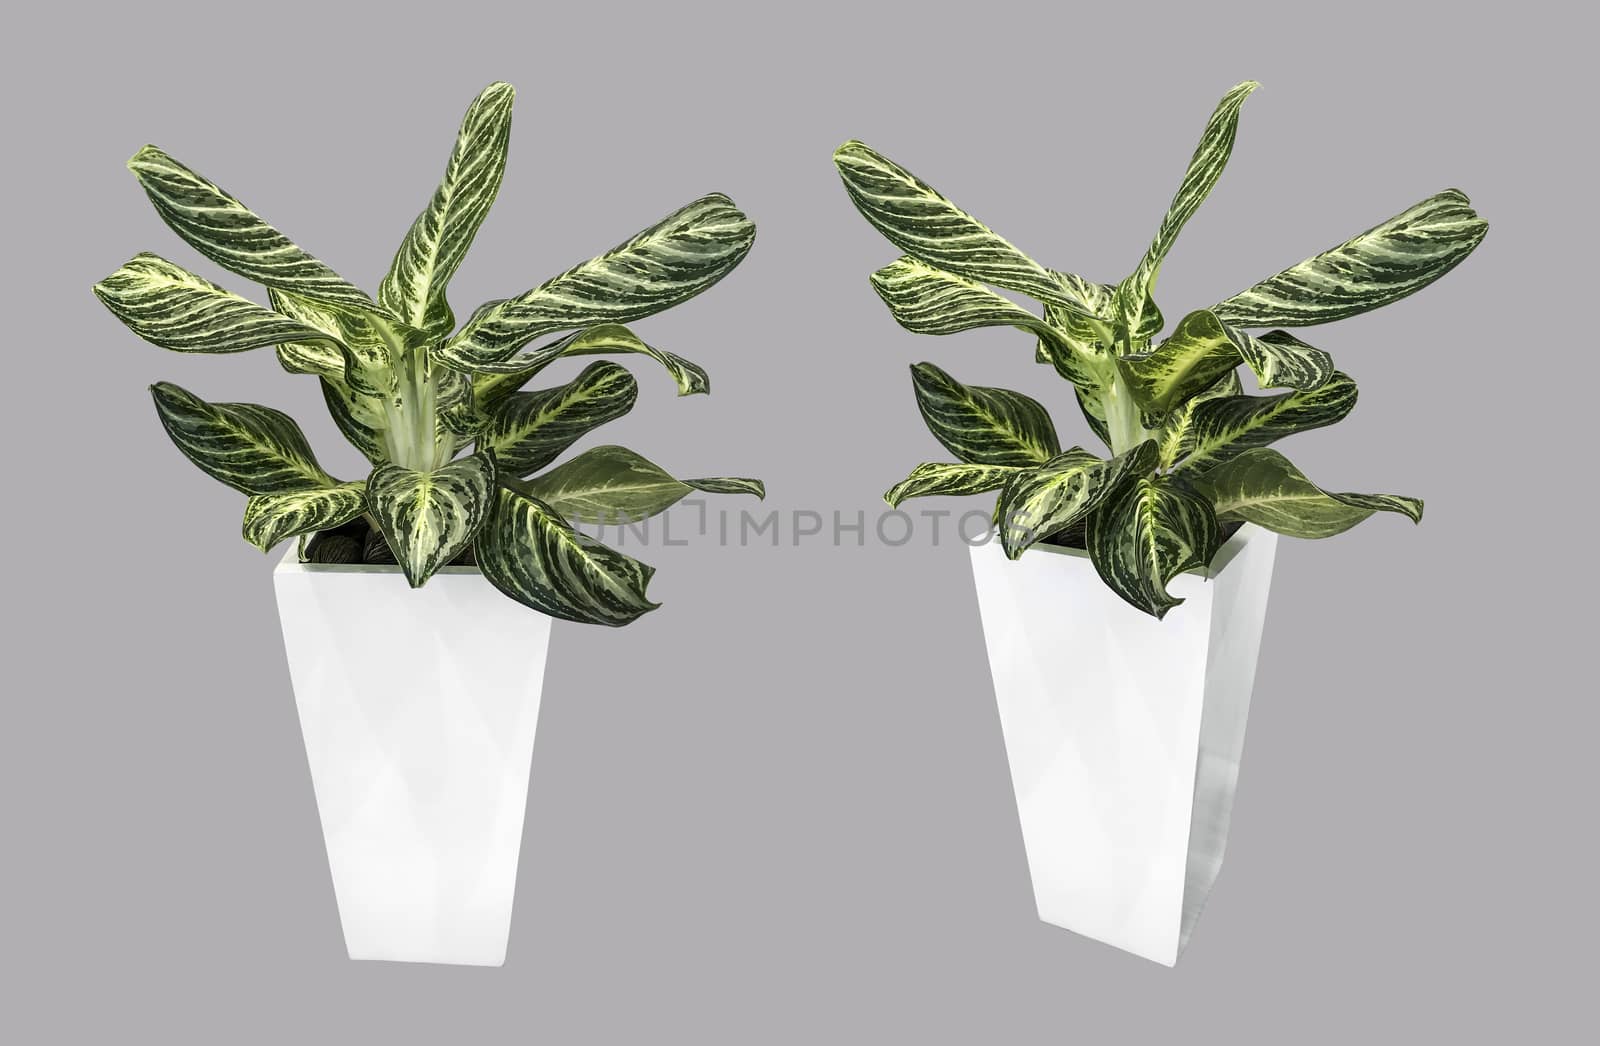 Dumb Cane tree in white pot isolated on gray background with clipping path